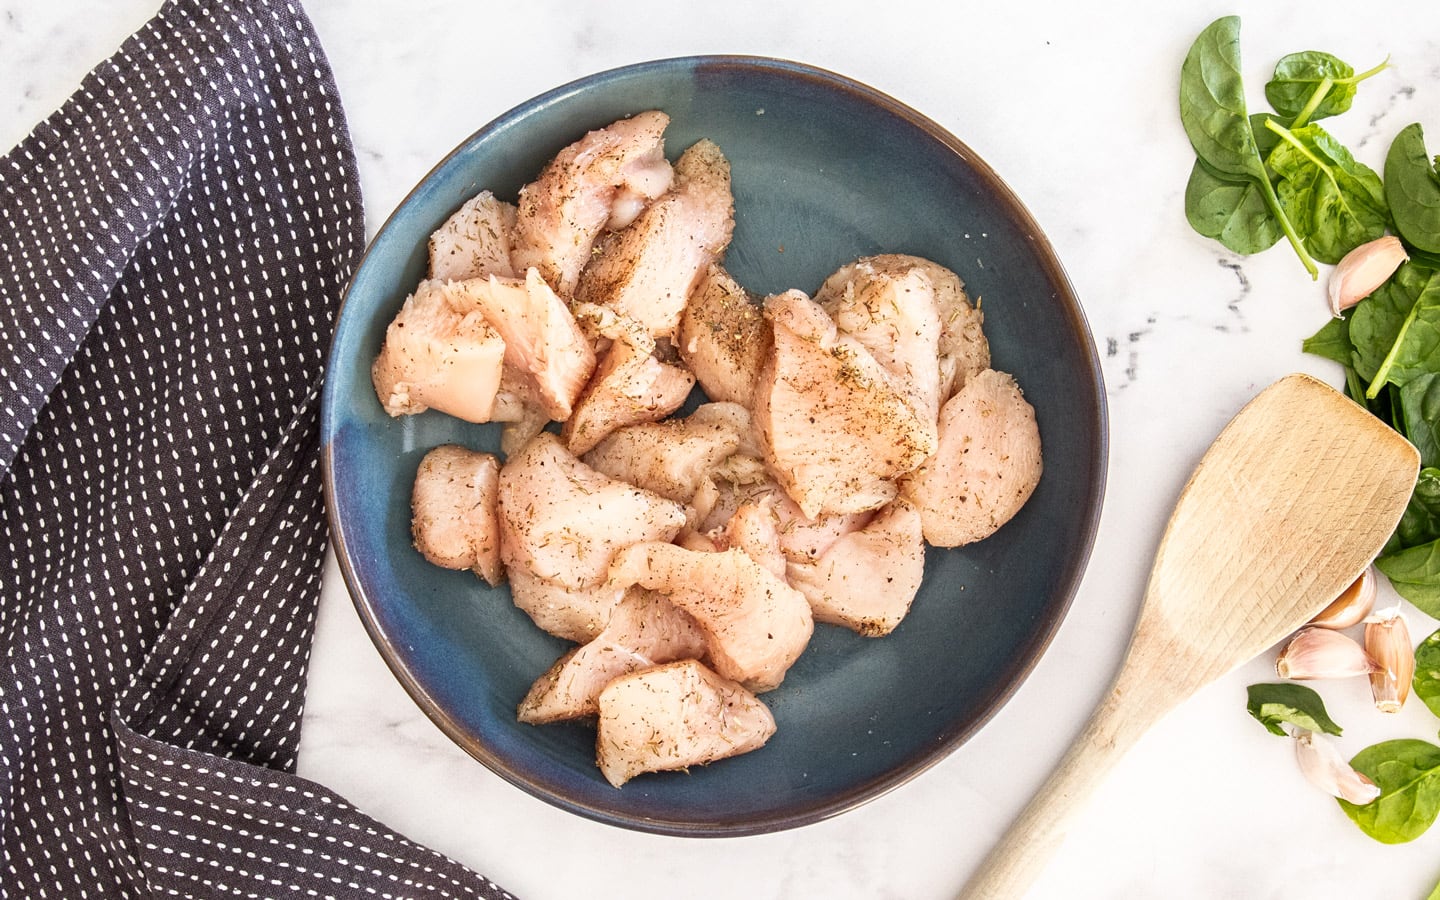 The seasoned chicken pieces in a bowl.